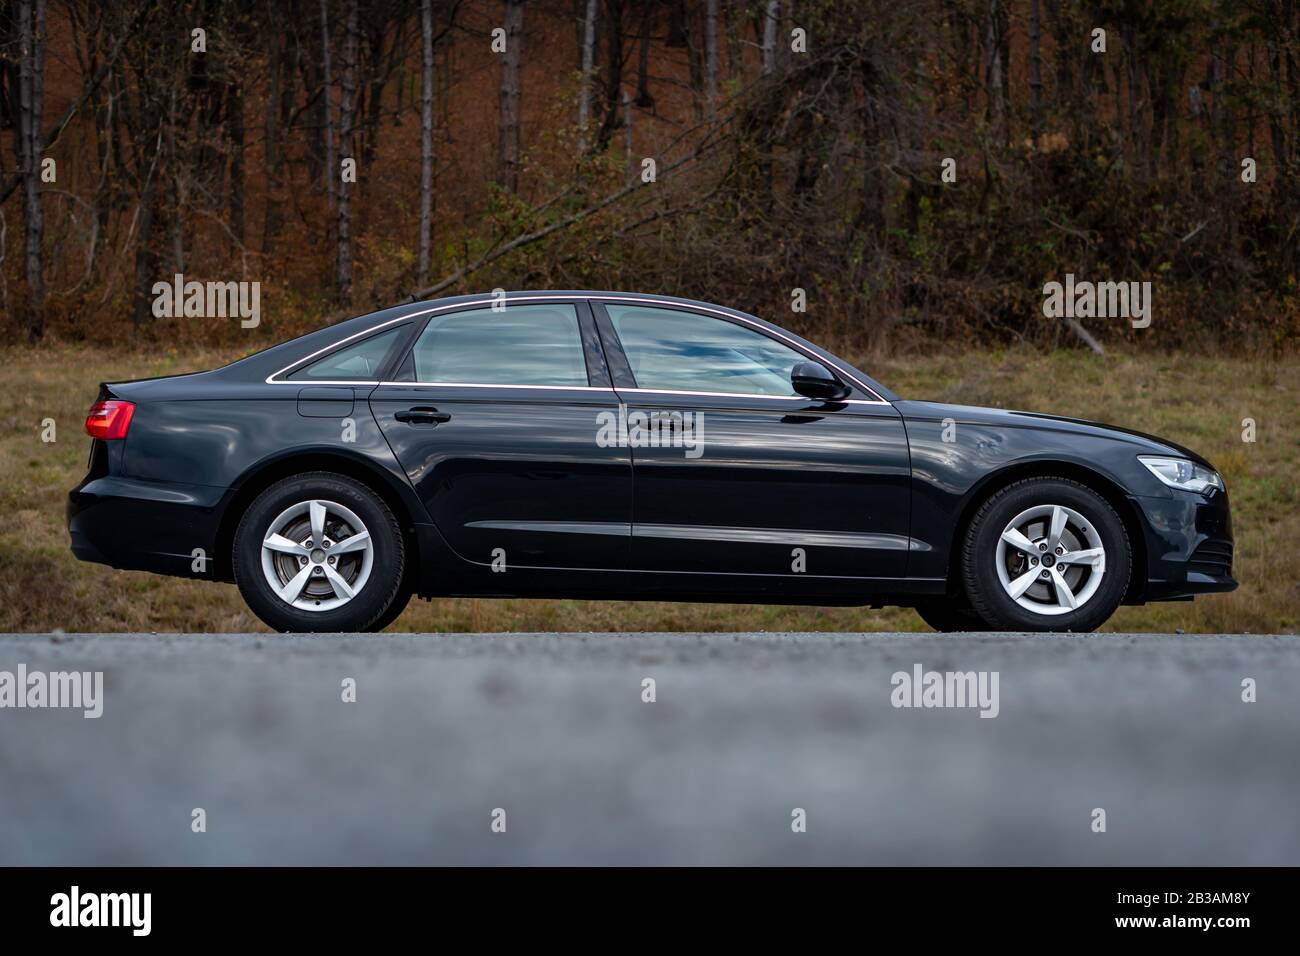 Audi A6 Year 2014-Sline. Sedan german car in an empty parking lot, photo session. Isolated, no people Stock Photo